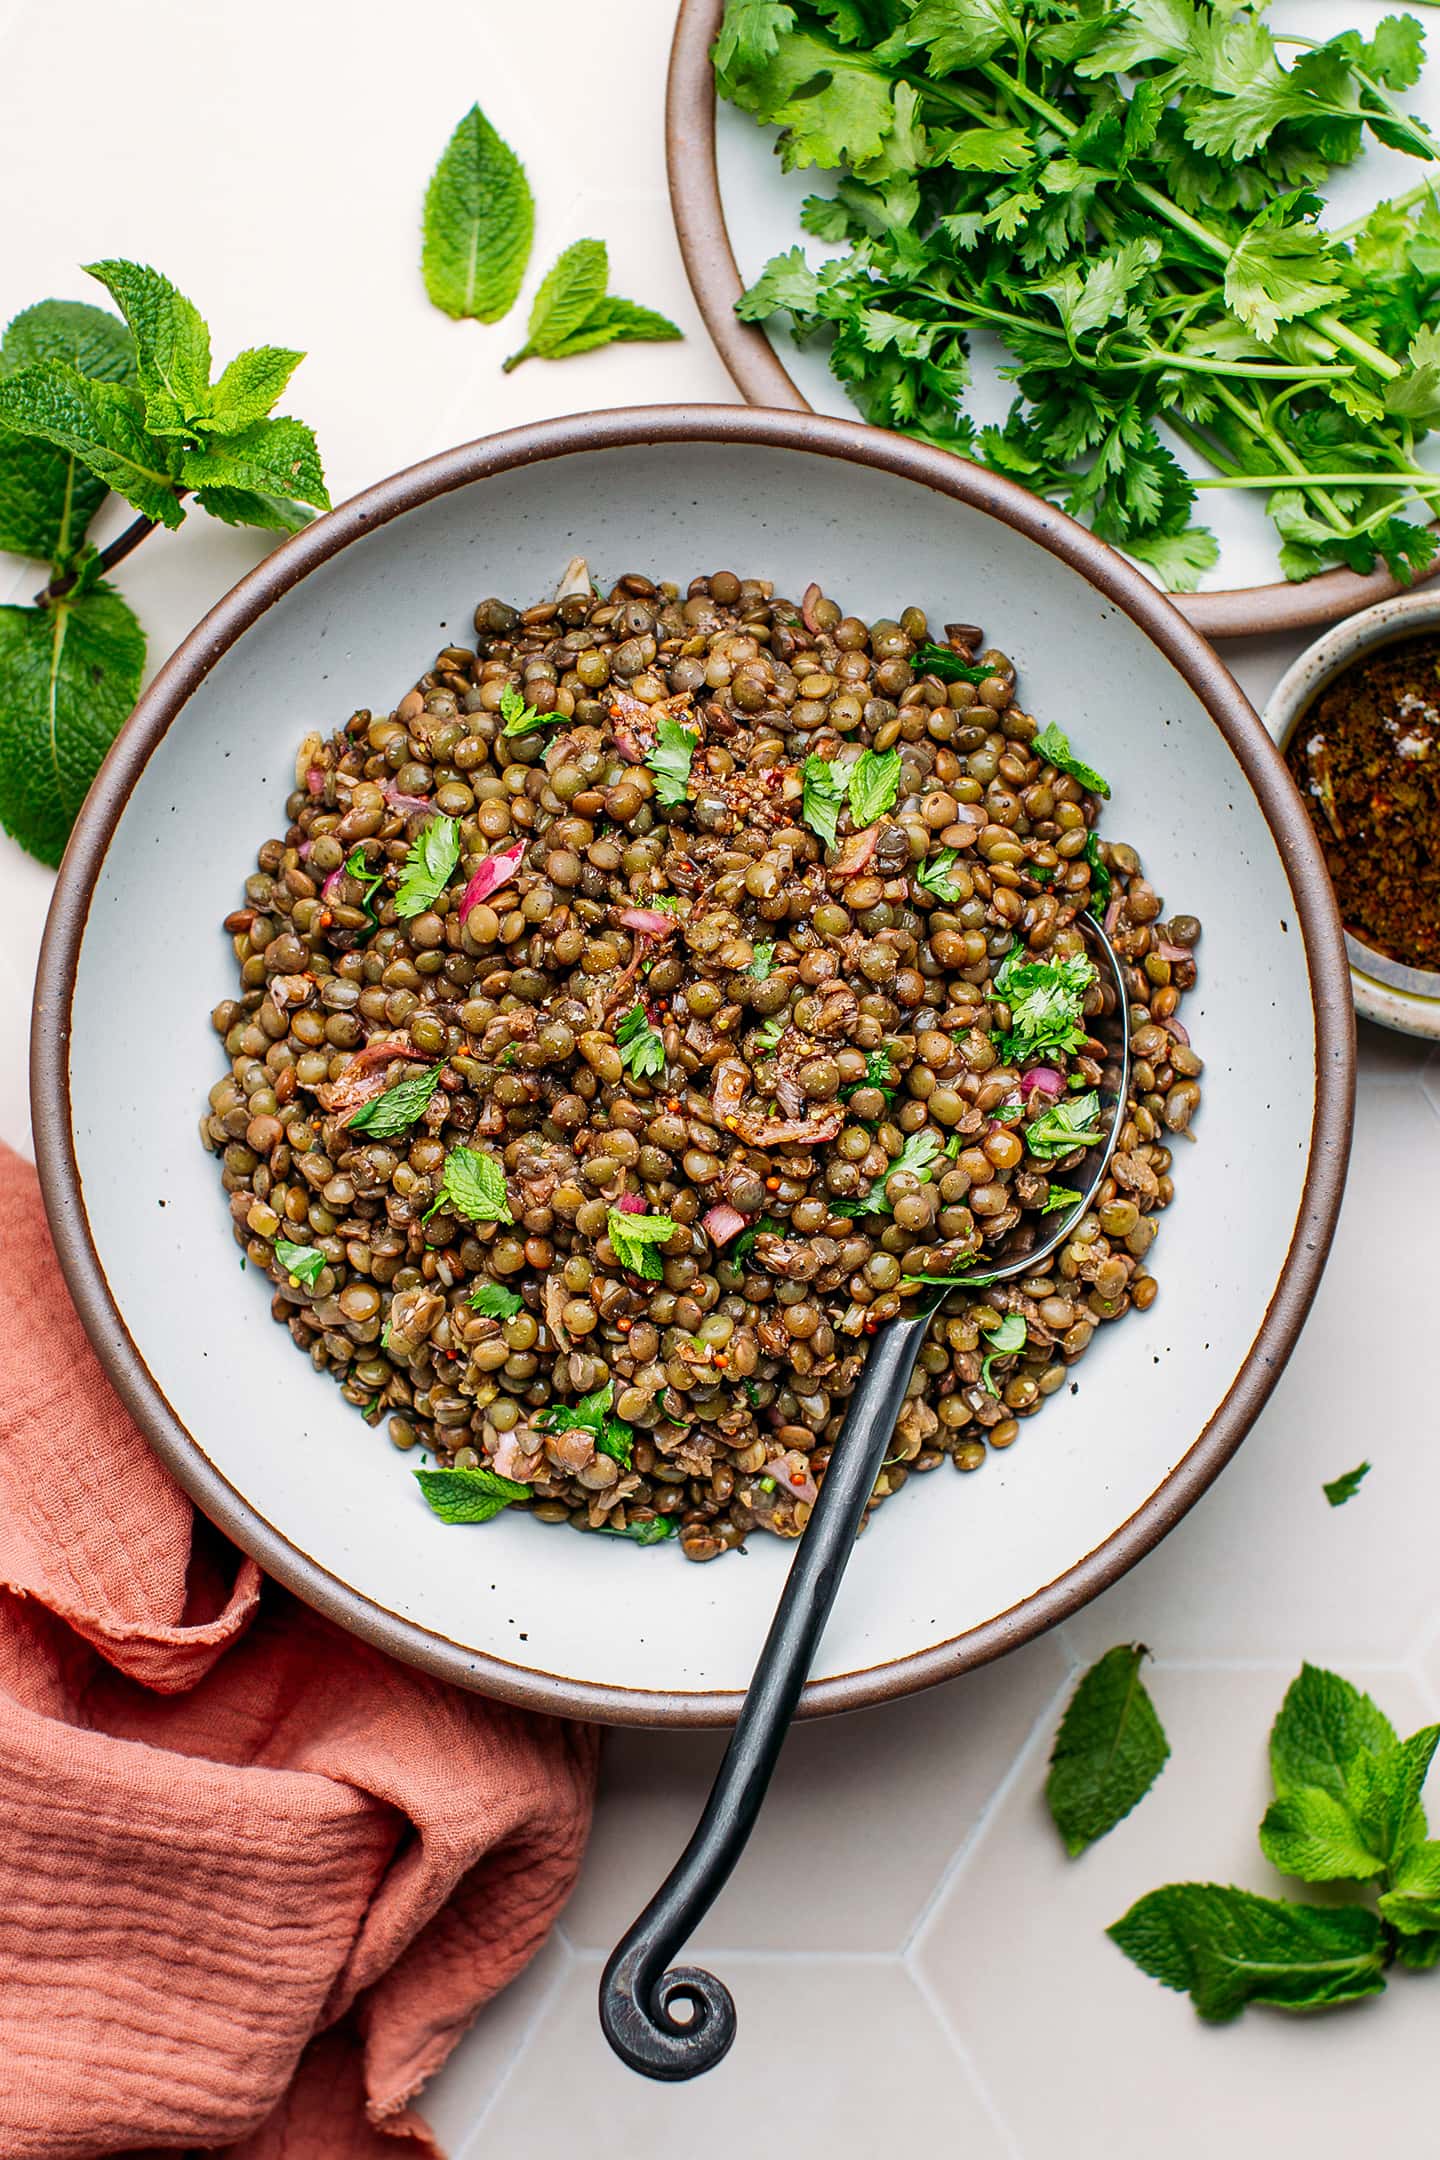 French green lentil salad in a bowl.